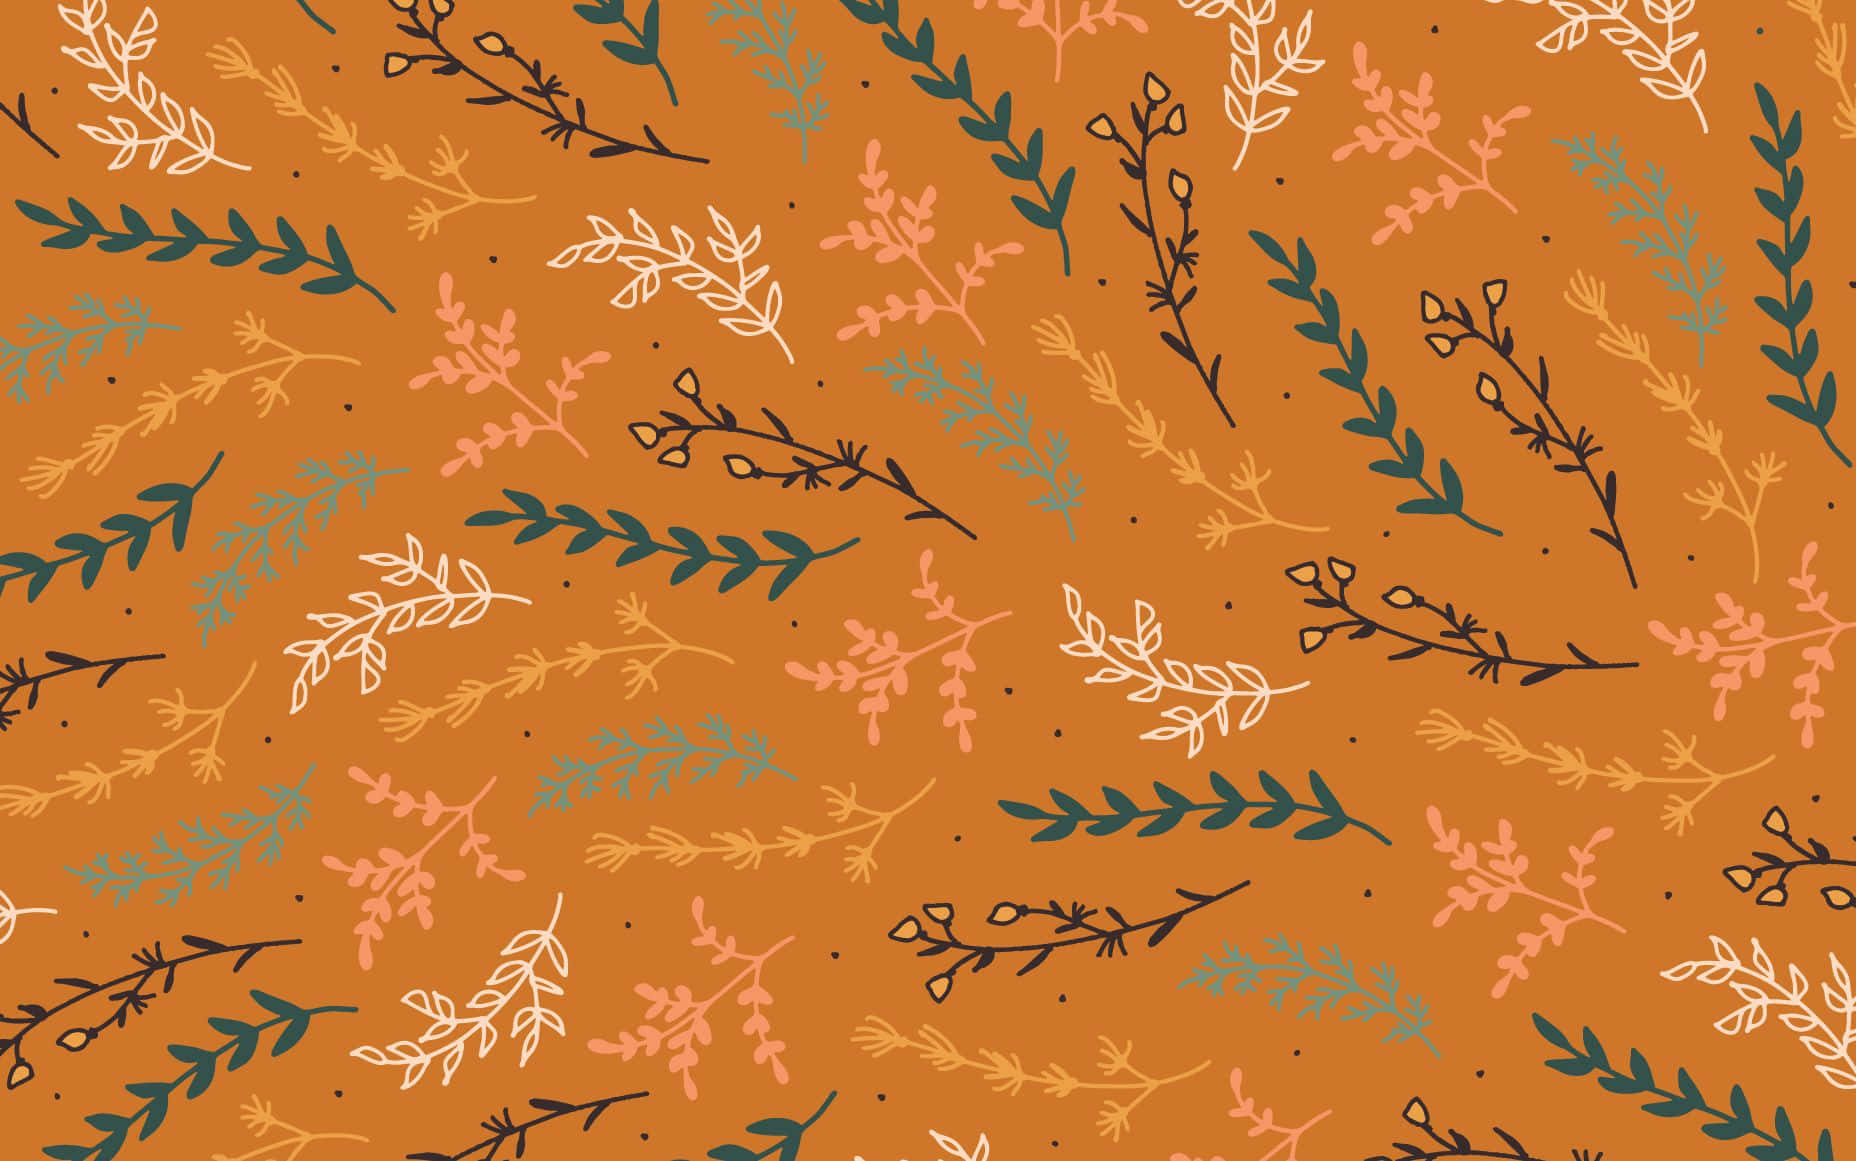 Embrace the tranquility of fall with a rustic and charming autumn inspired desktop background Wallpaper